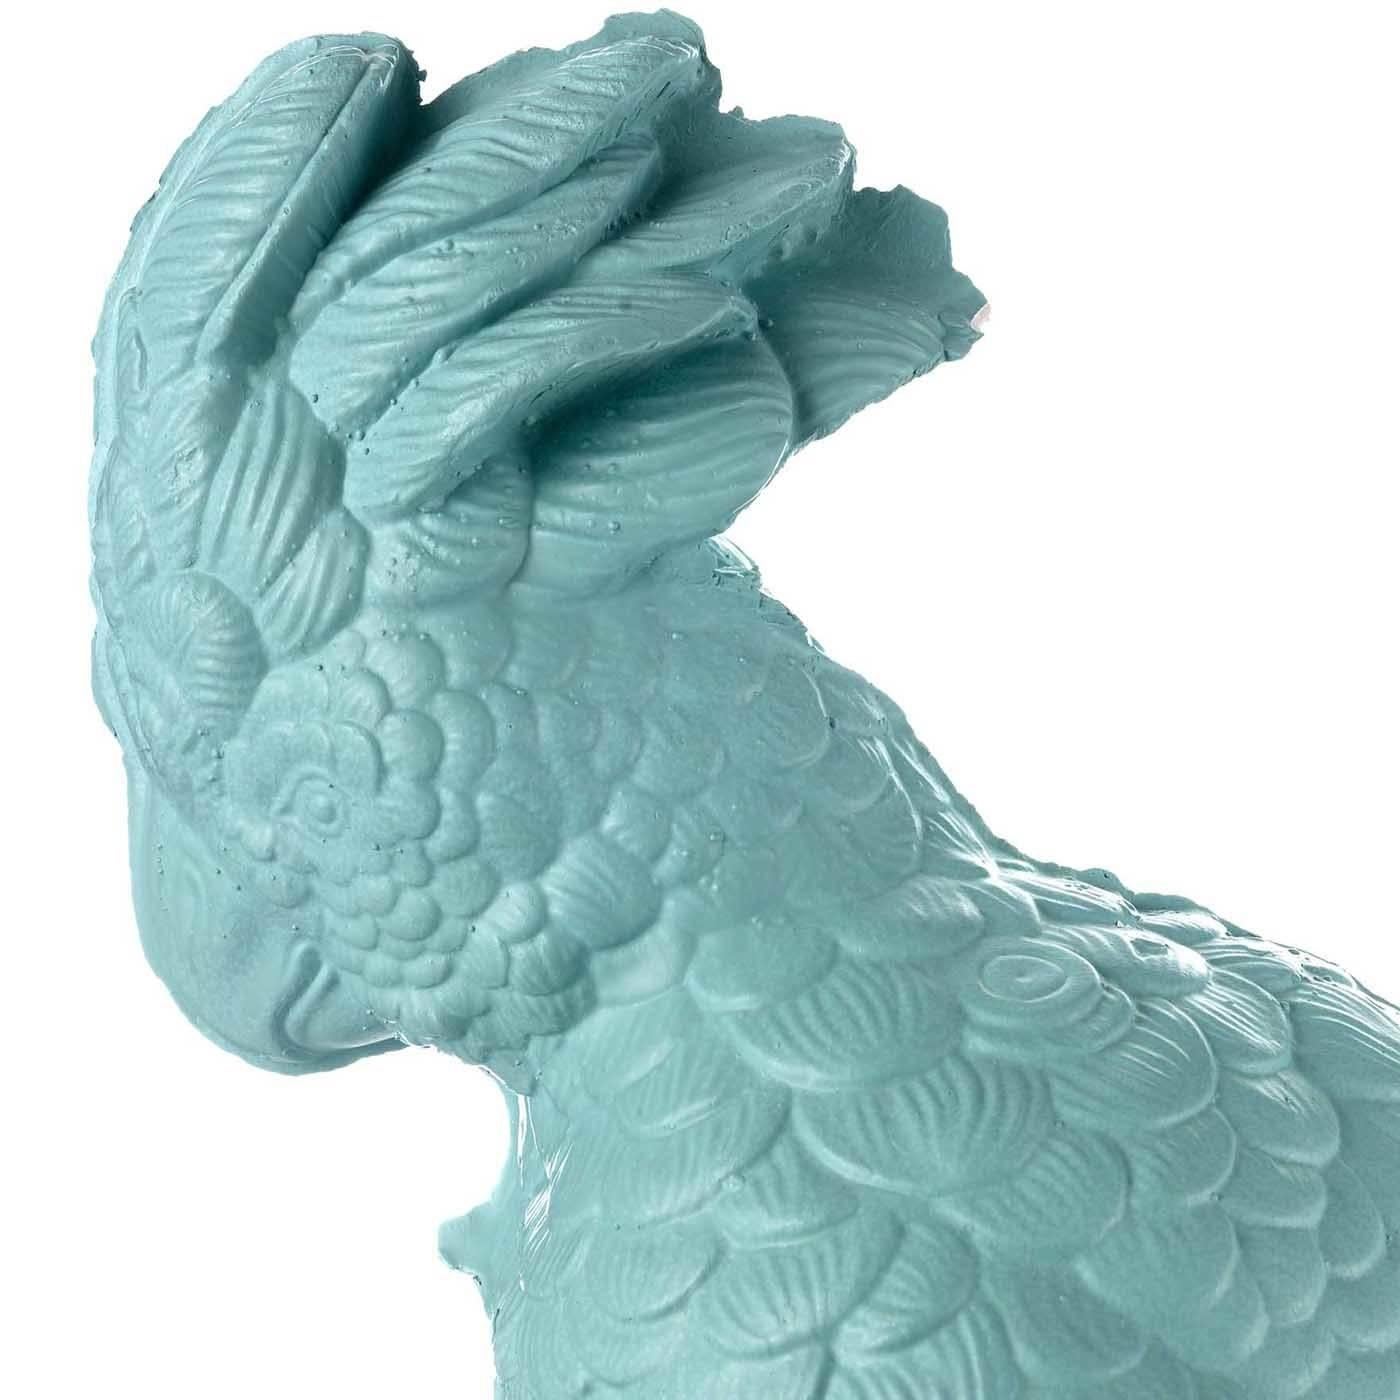 This striking decorative object reproduces a parrot in all its vivid details. The bird is perched on a blooming pedestal and has a magnificent crest of feathers on its head. The Fine ceramic used to create this piece has a precious satin finish and